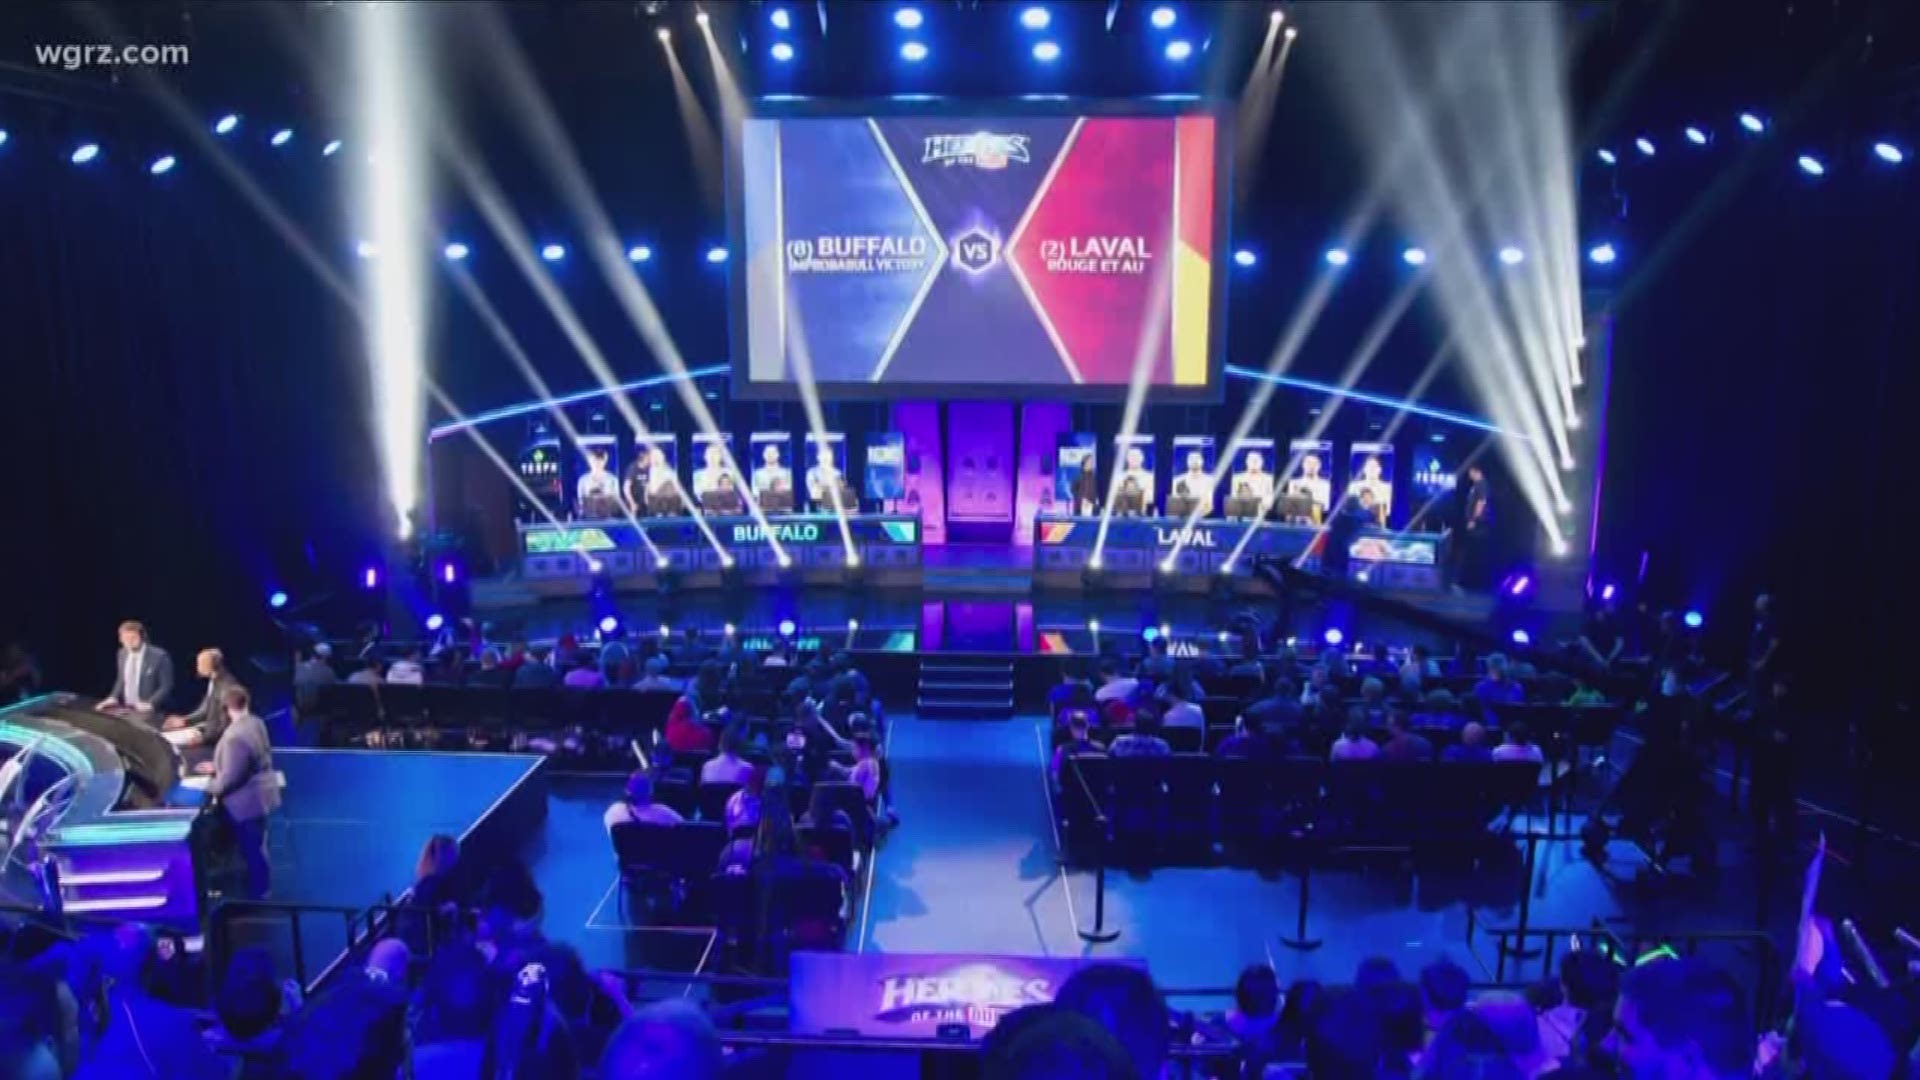 UB's eSports team is fresh off a second place finish at the "Heroes of the Dorm" Tournament in California.